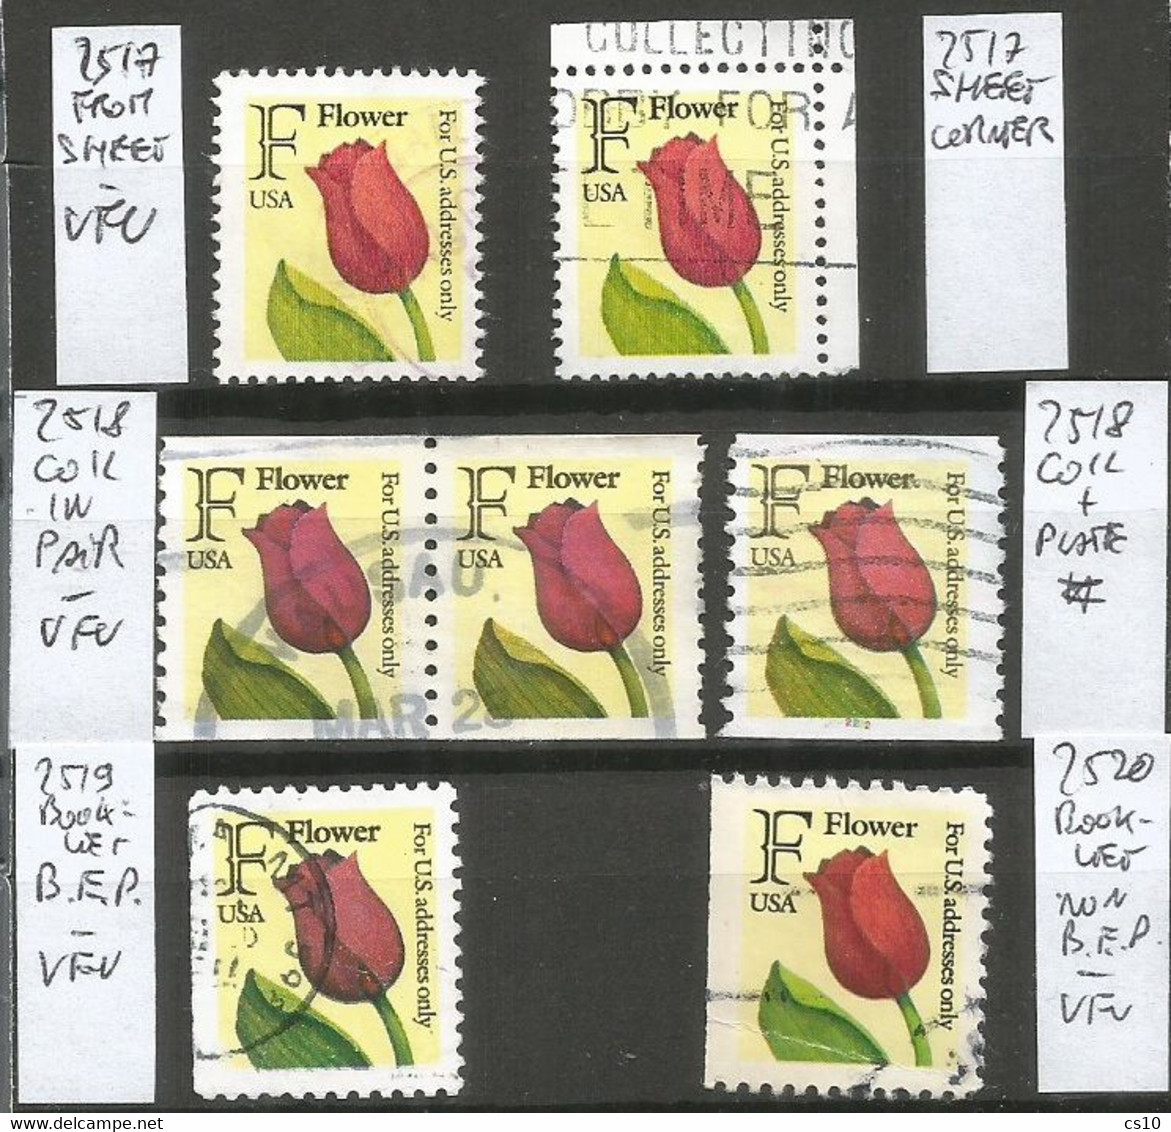 USA 1991 Tulip "F" Rate SC.#2517/20 Cpl 4+2v Set : Sheet + Corner, Coil + Table #, Booklet Perf Block+ Line - Mainly VFU - Coils & Coil Singles